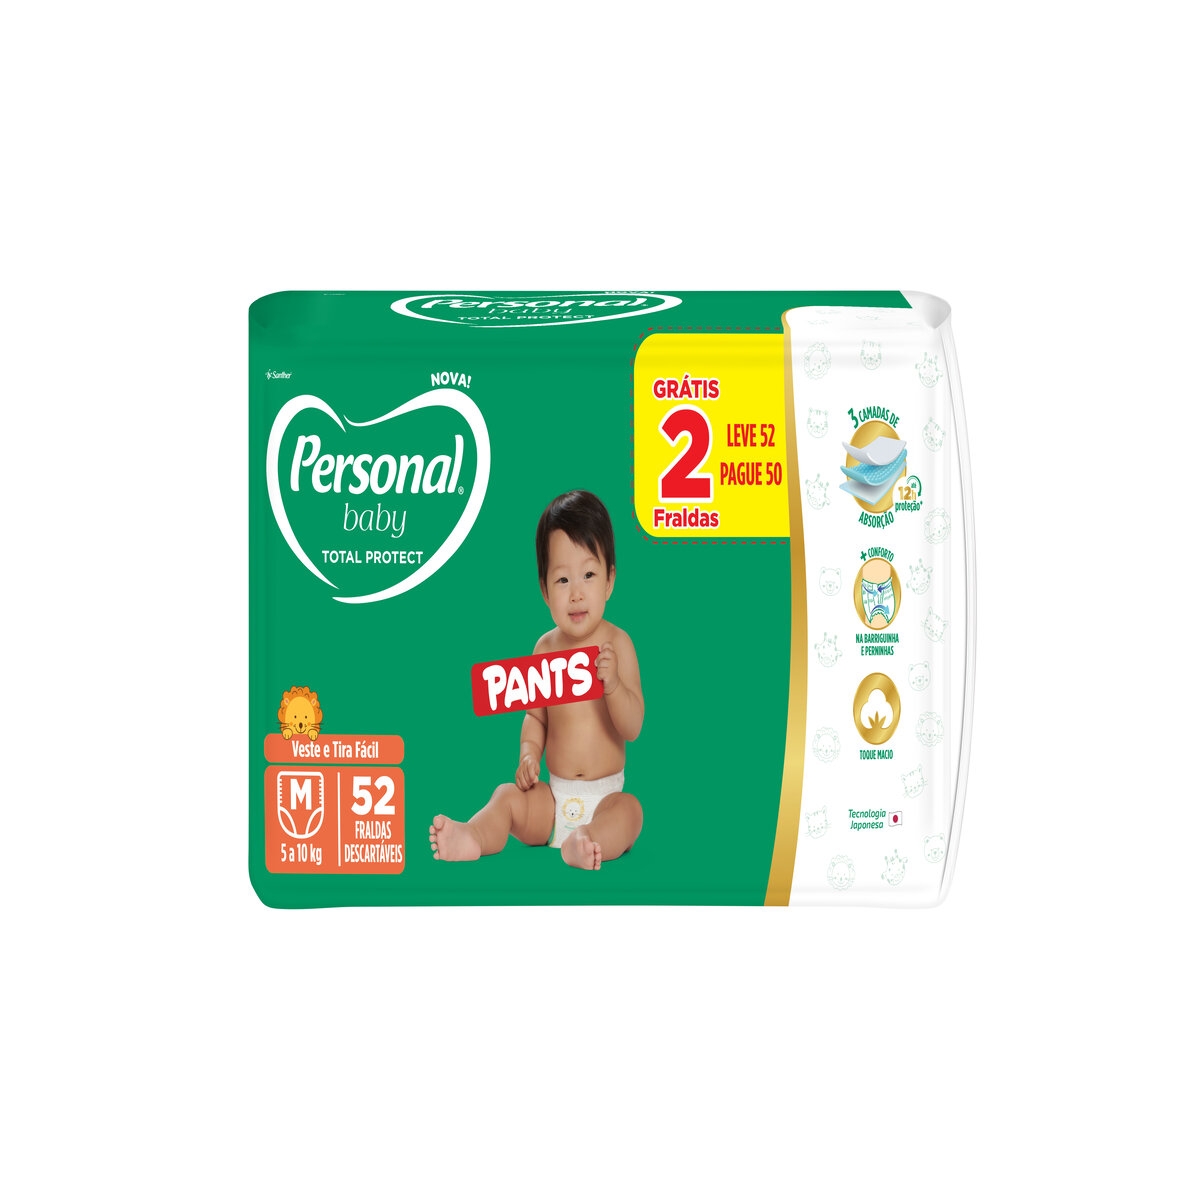 https://img.drogasil.com.br/media/catalog/product/f/r/fralda-personal-baby-total-protect-pants-m-52-unidades.jpg